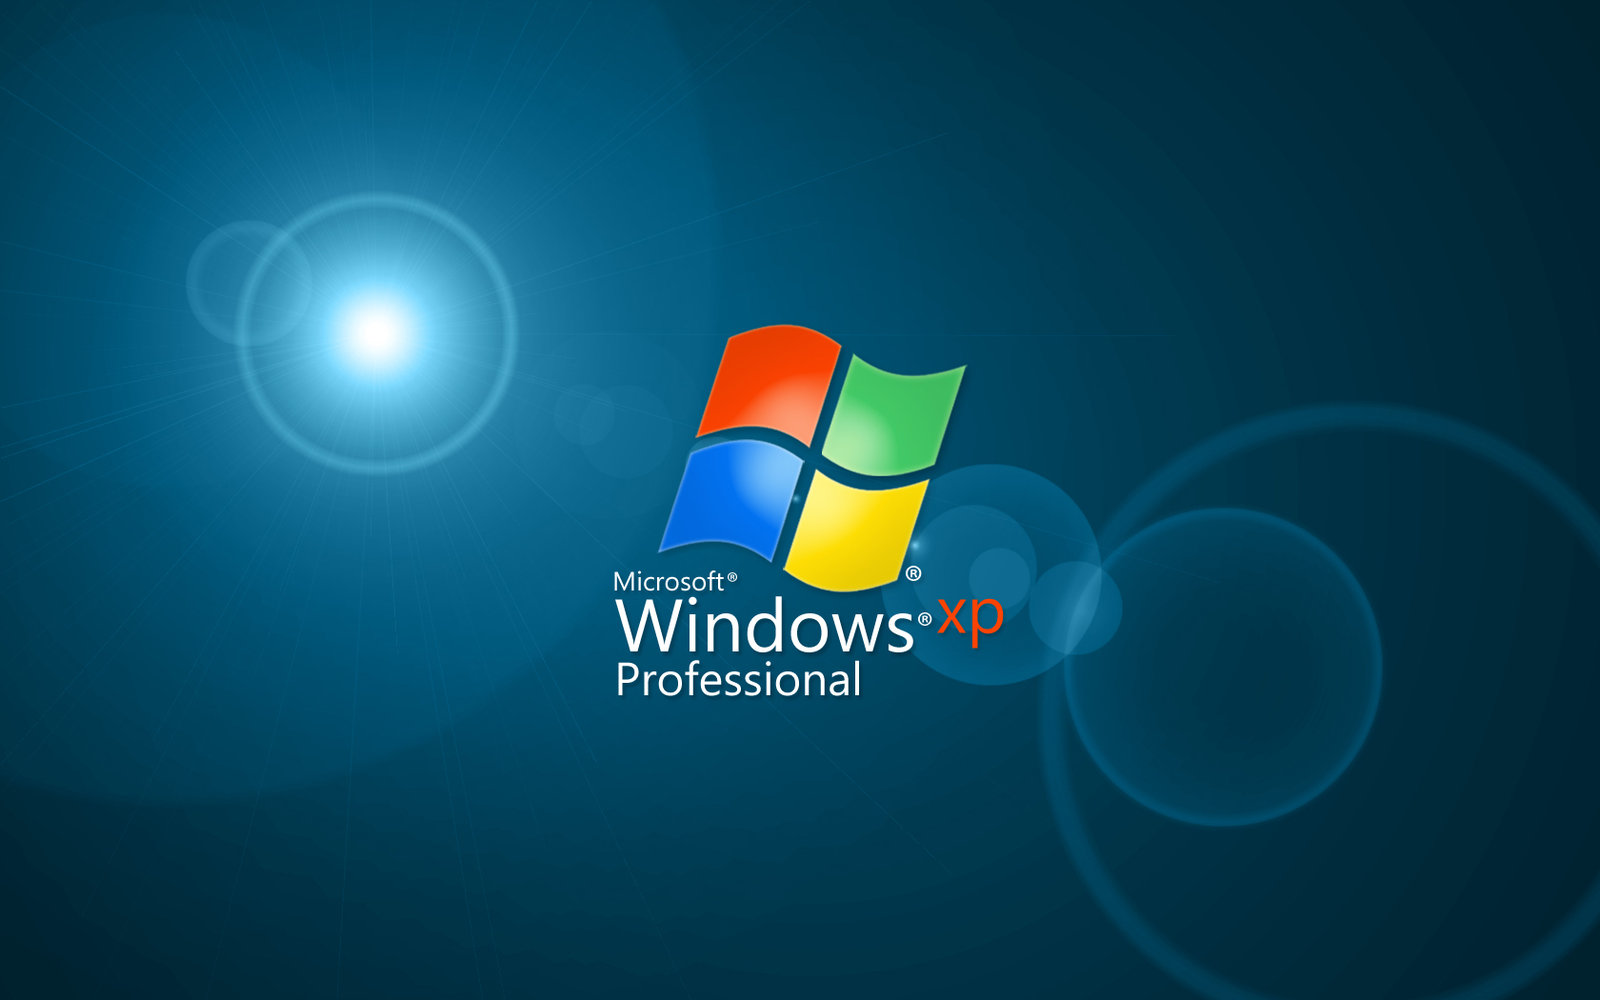 Windows 7 Ultimate by ant-ony on DeviantArt